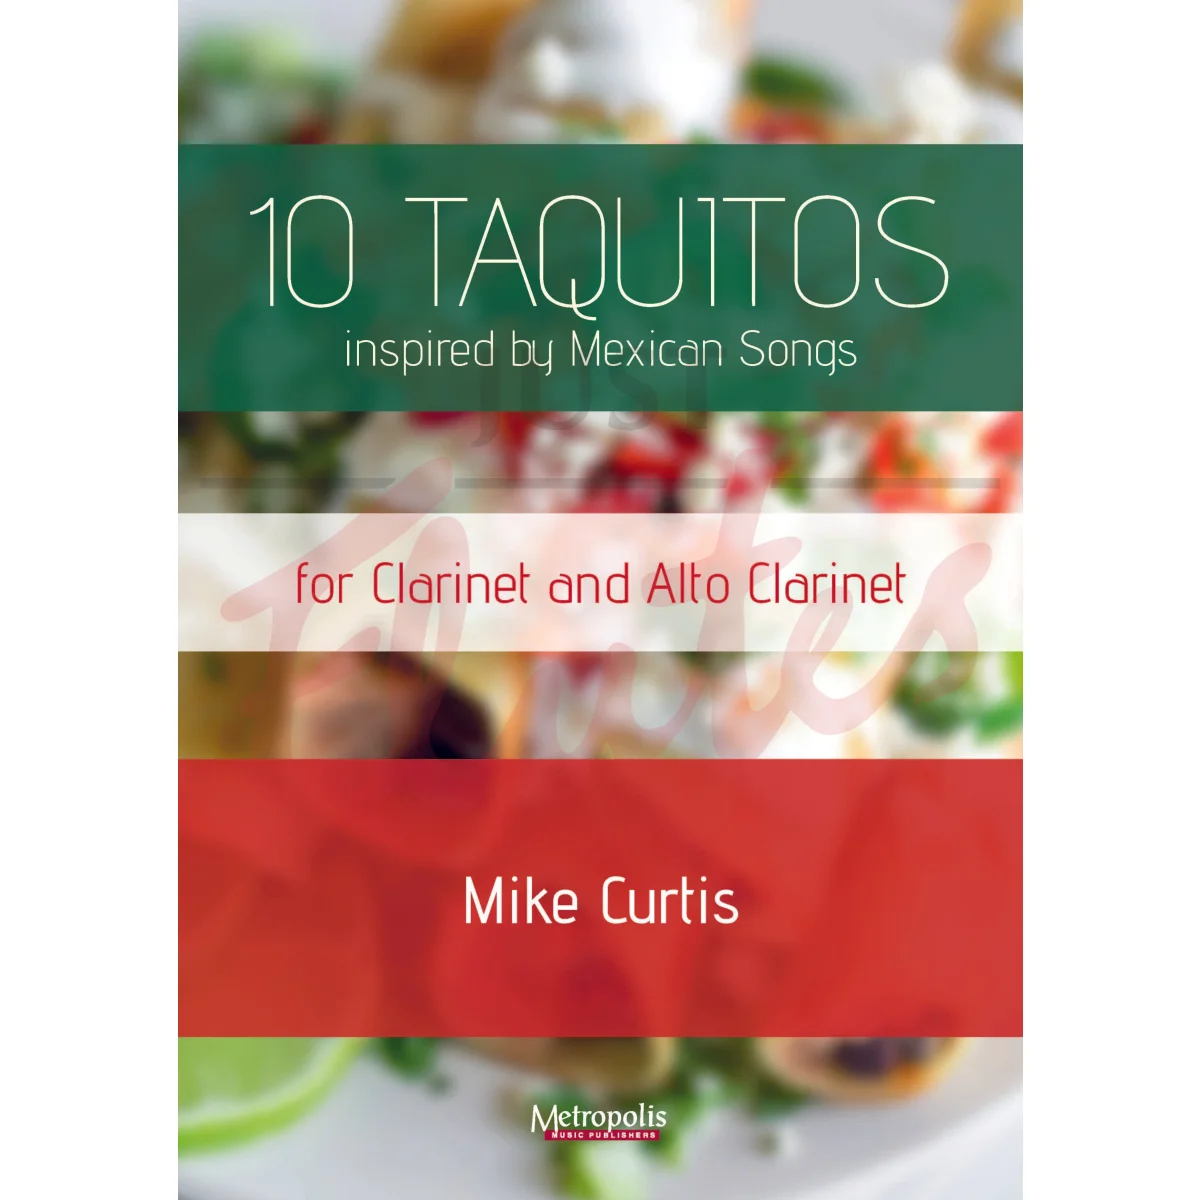 10 Taquitos for Clarinet and Alto Clarinet or Bass Clarinet